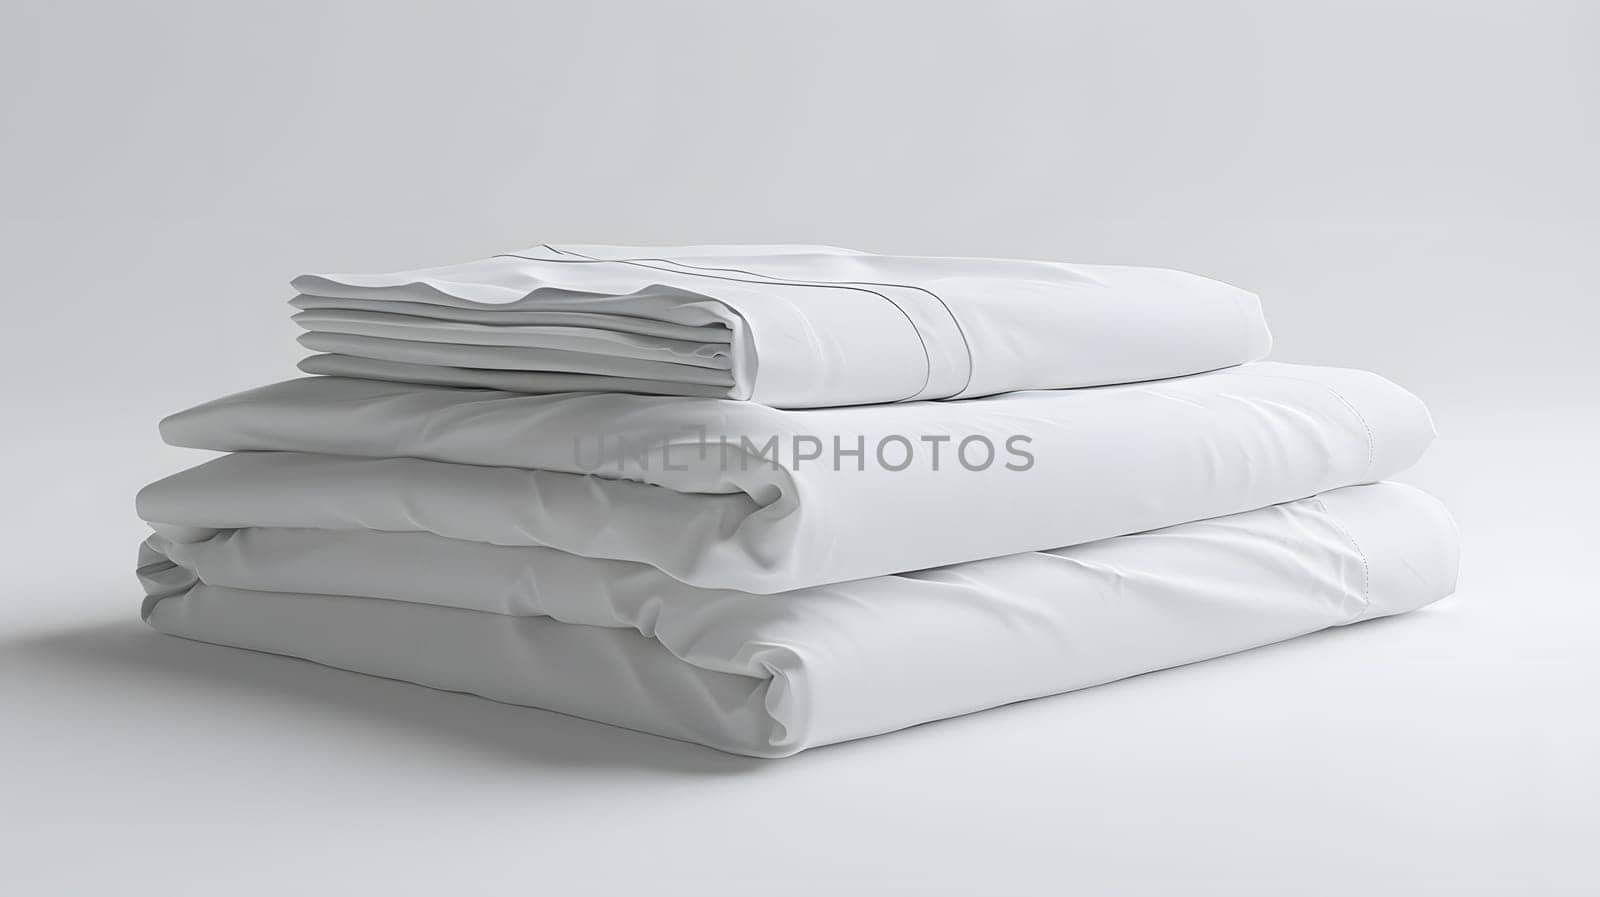 Rectangular stack of white linens and pillows on white surface by Nadtochiy